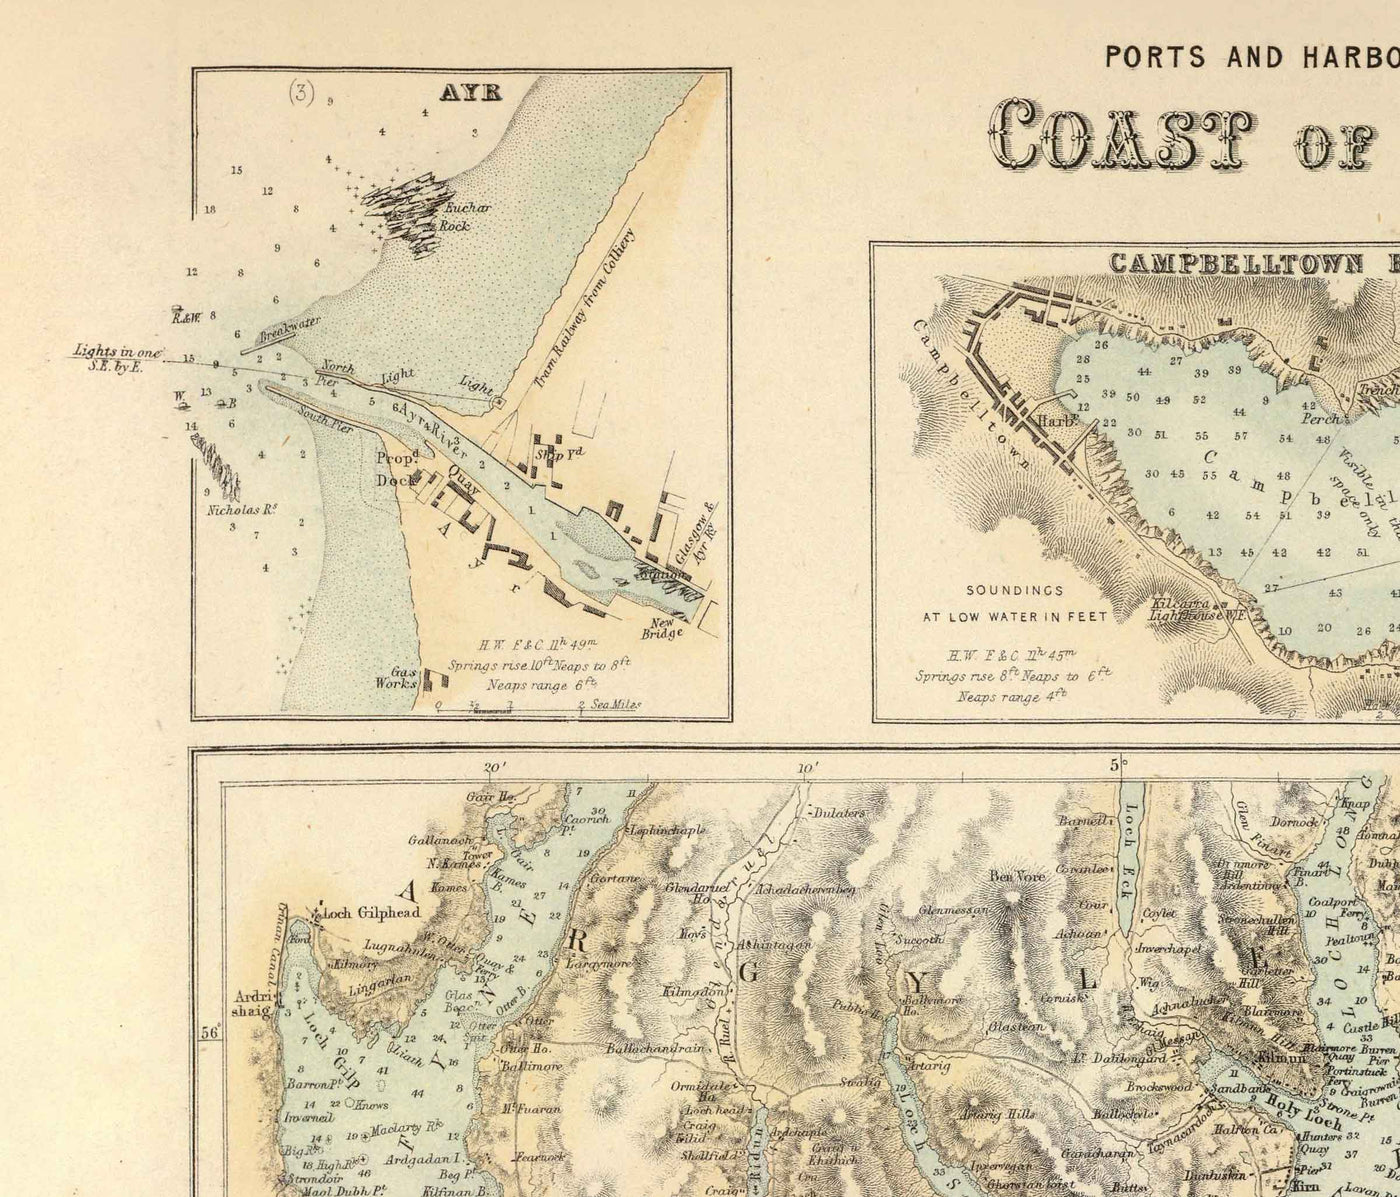 Old Map of the Ports & Harbours of the West Coast of Scotland, 1872 by Fullarton - Glasgow, Largs, Portpatrick, Irvine, Ayr